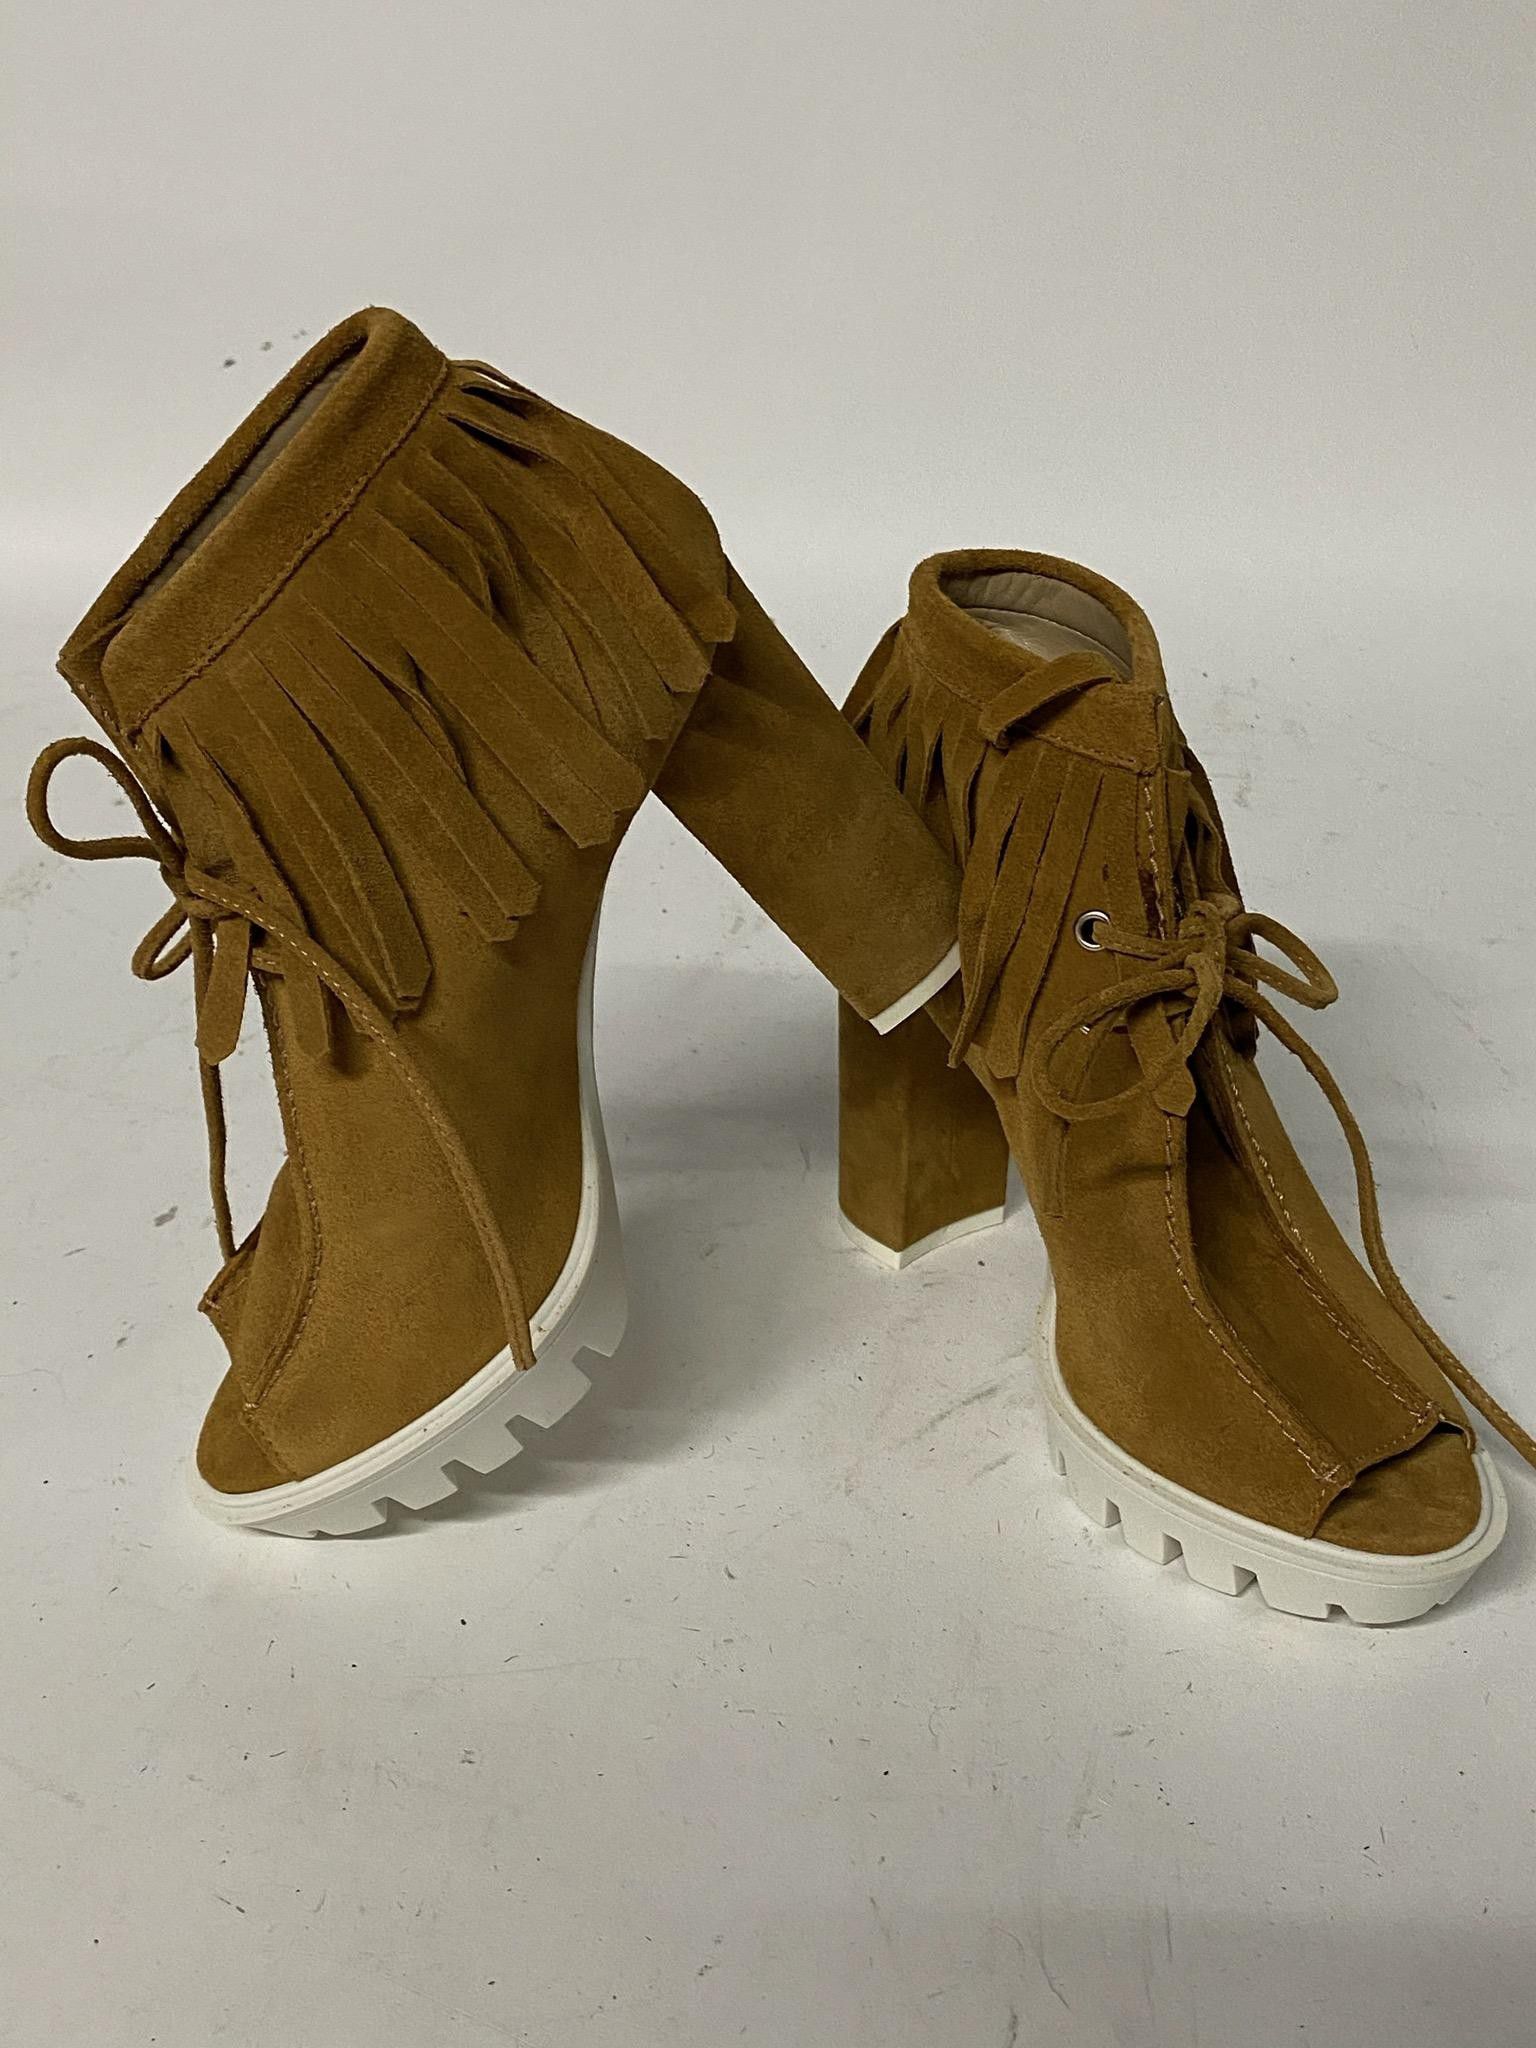 Brand new BCBGMaxAzaria Brown Suede Peep-Toe Booties with Fringe, Size 6.5